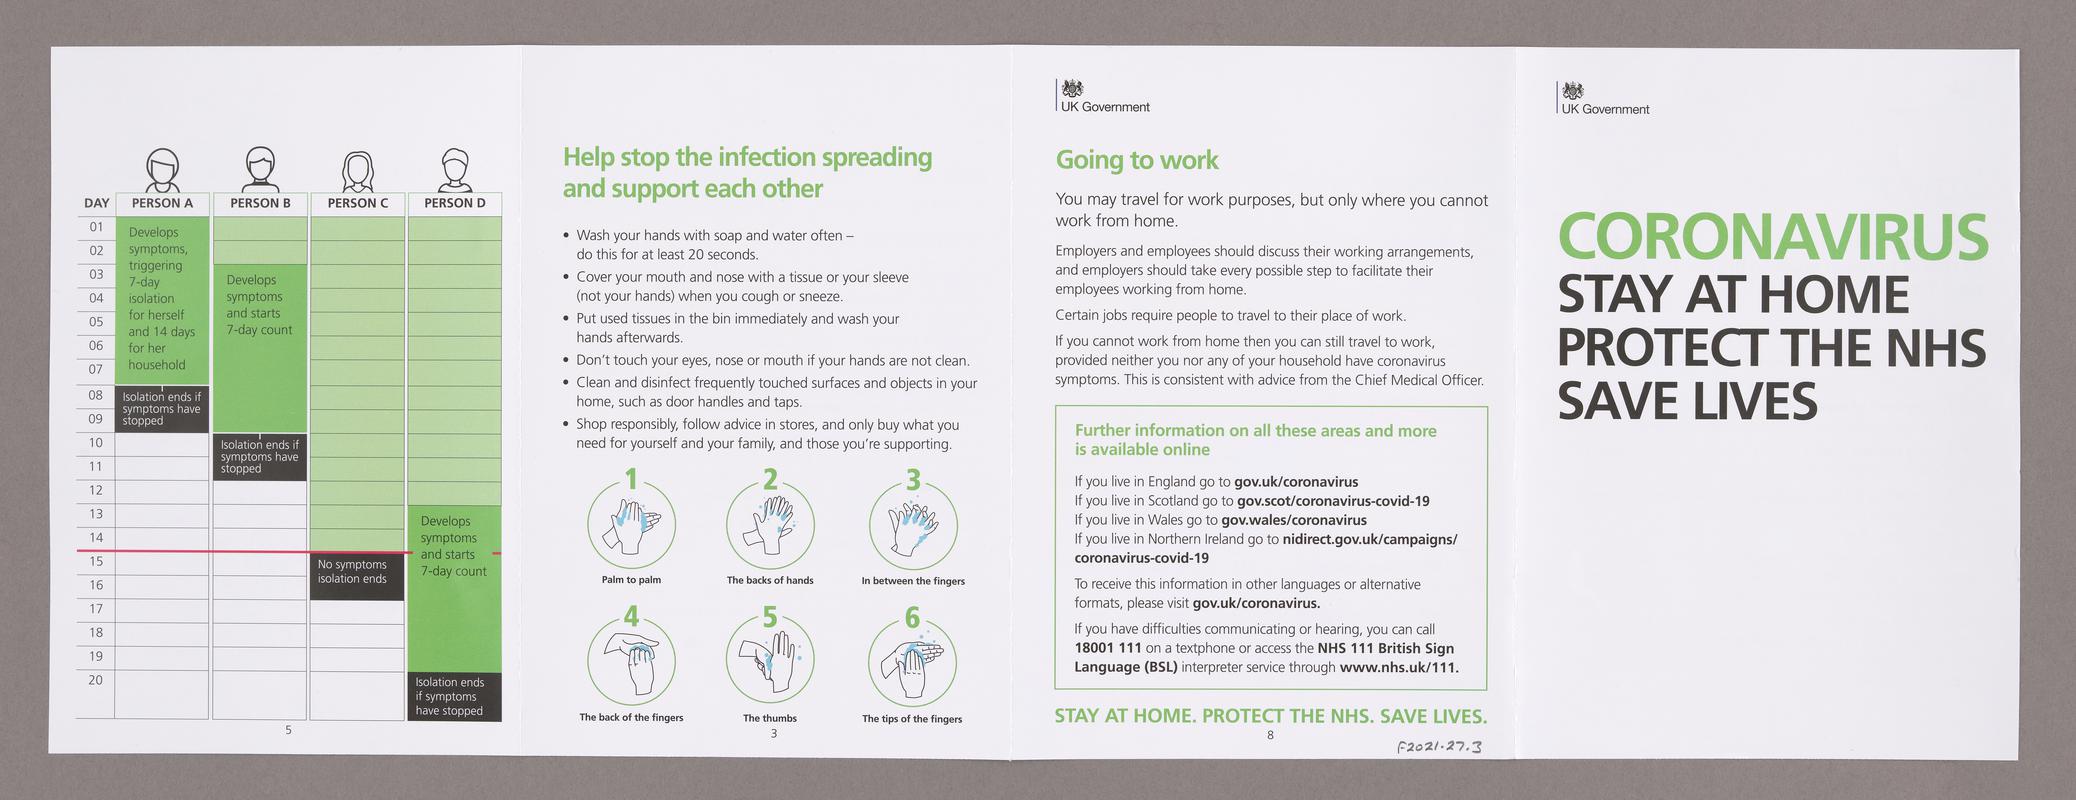 Leaflet &#039;Coronavirus Stay at Home Protect the NHS Save Lives&#039;, sent by UK Government to every UK household in April 2020.